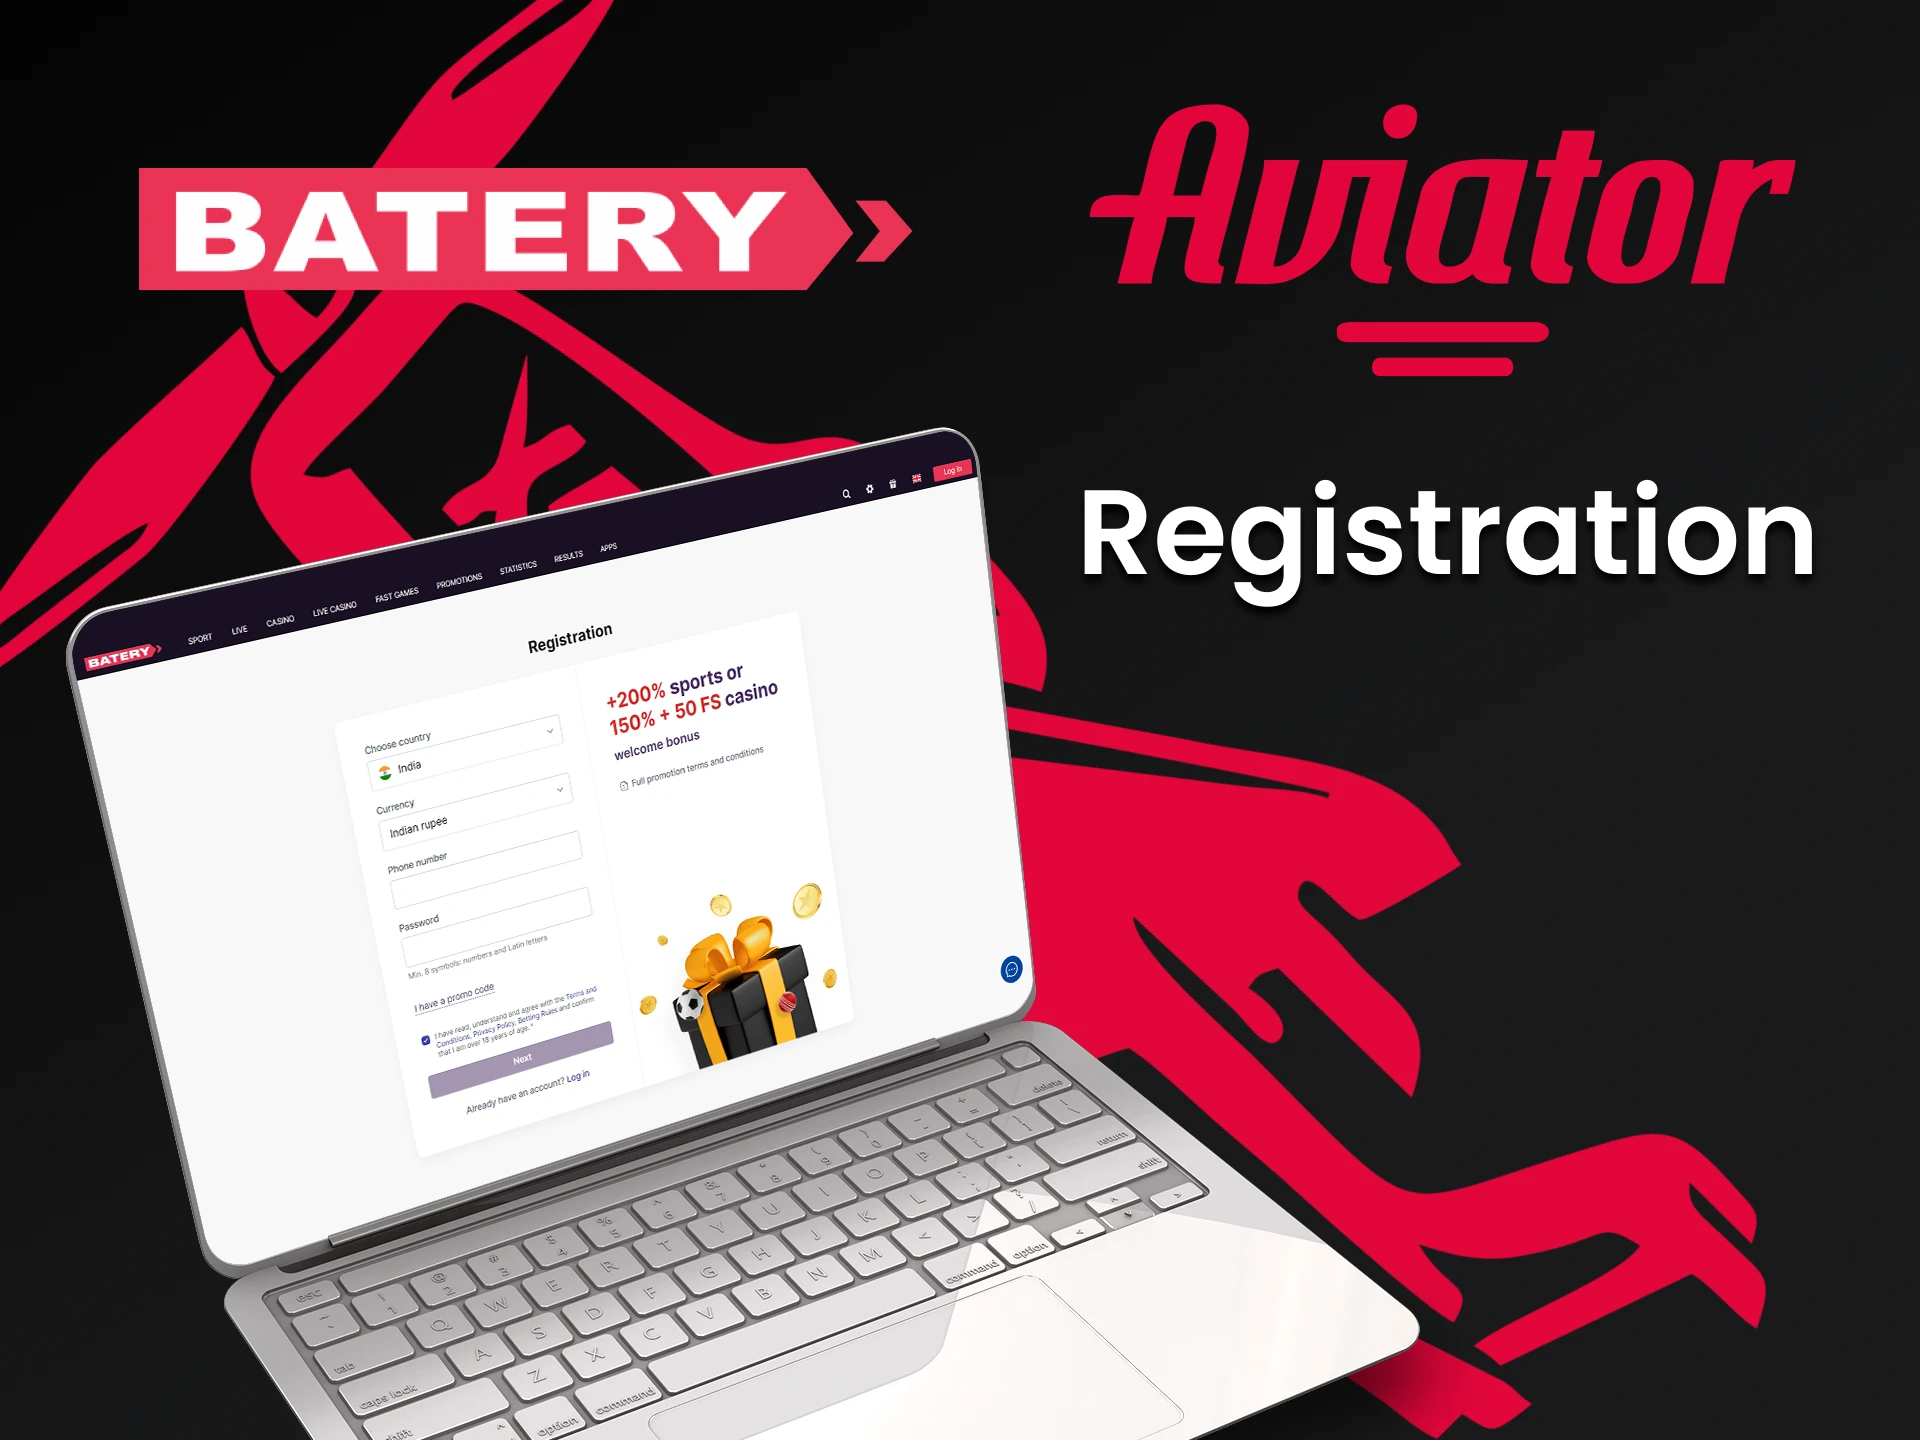 Create a personal account on Batery to play Aviator.